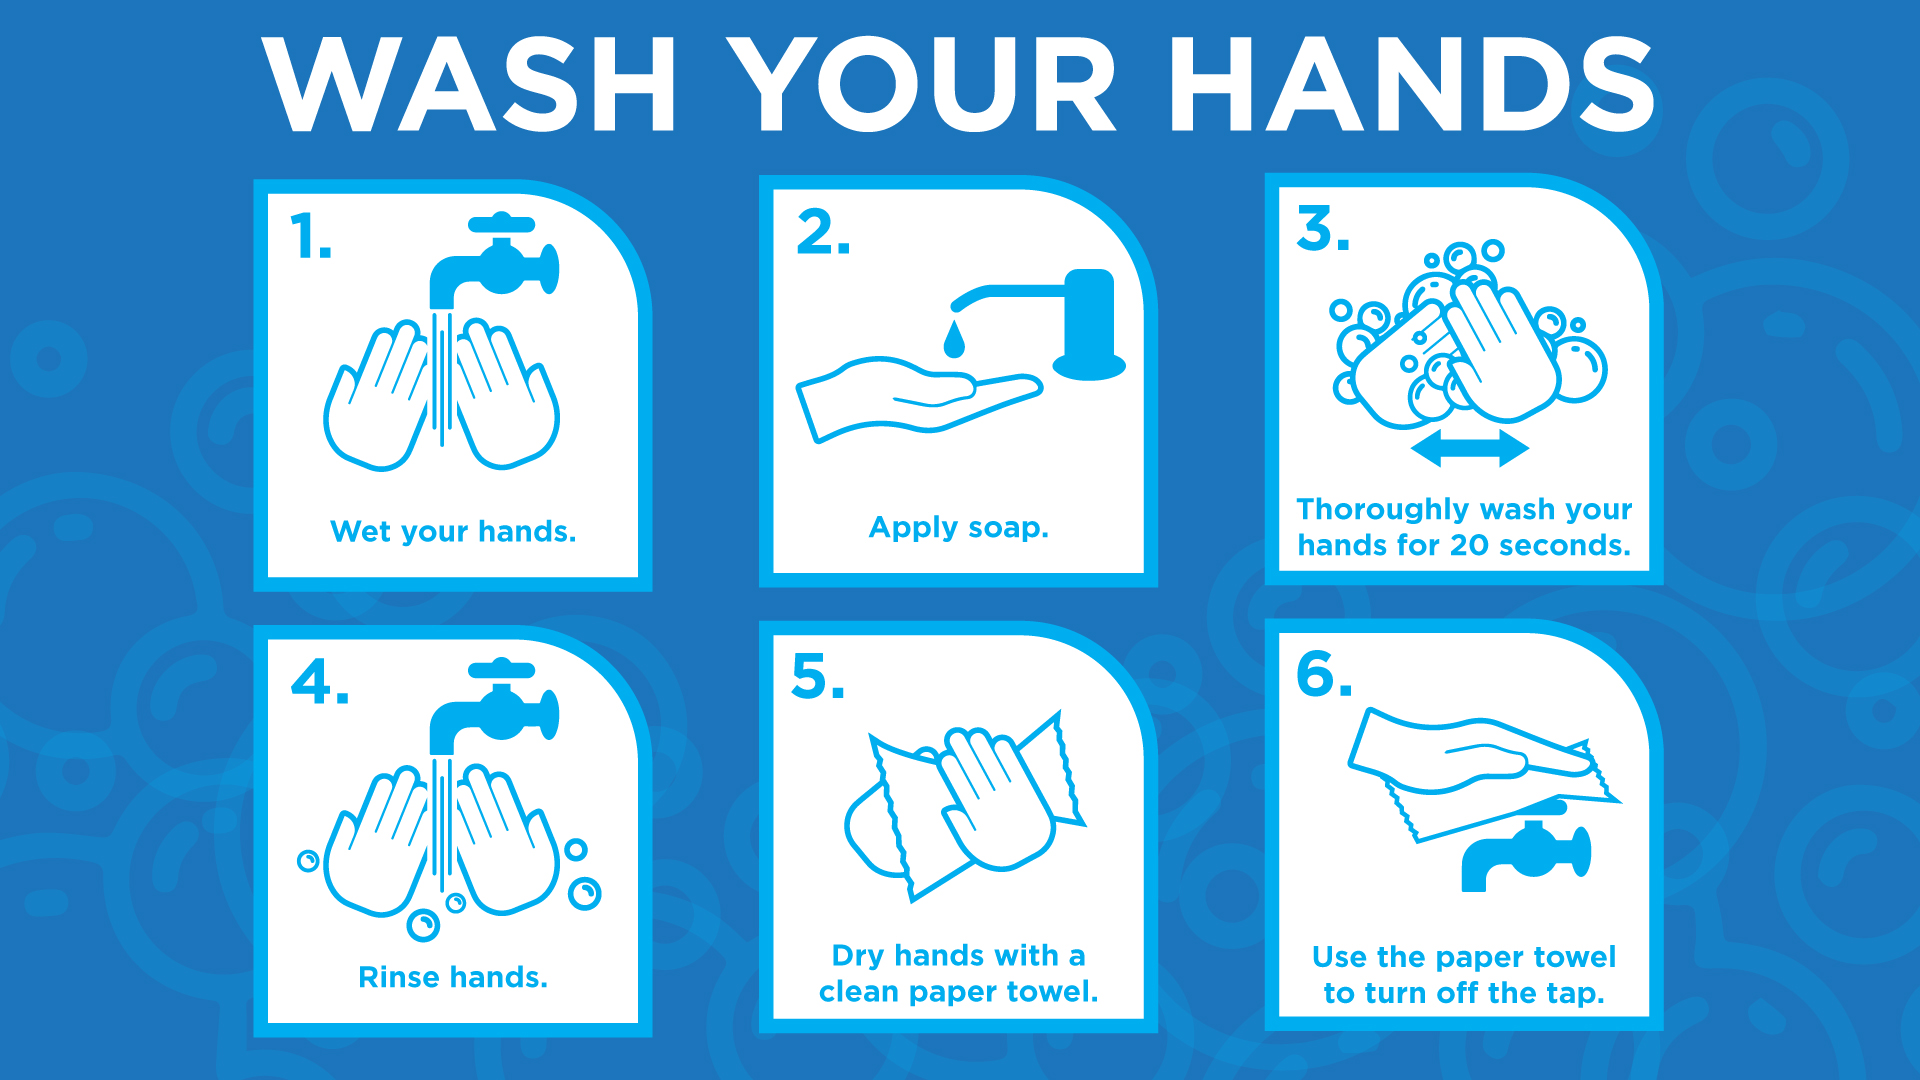 Wash Hands Poster 24x12"